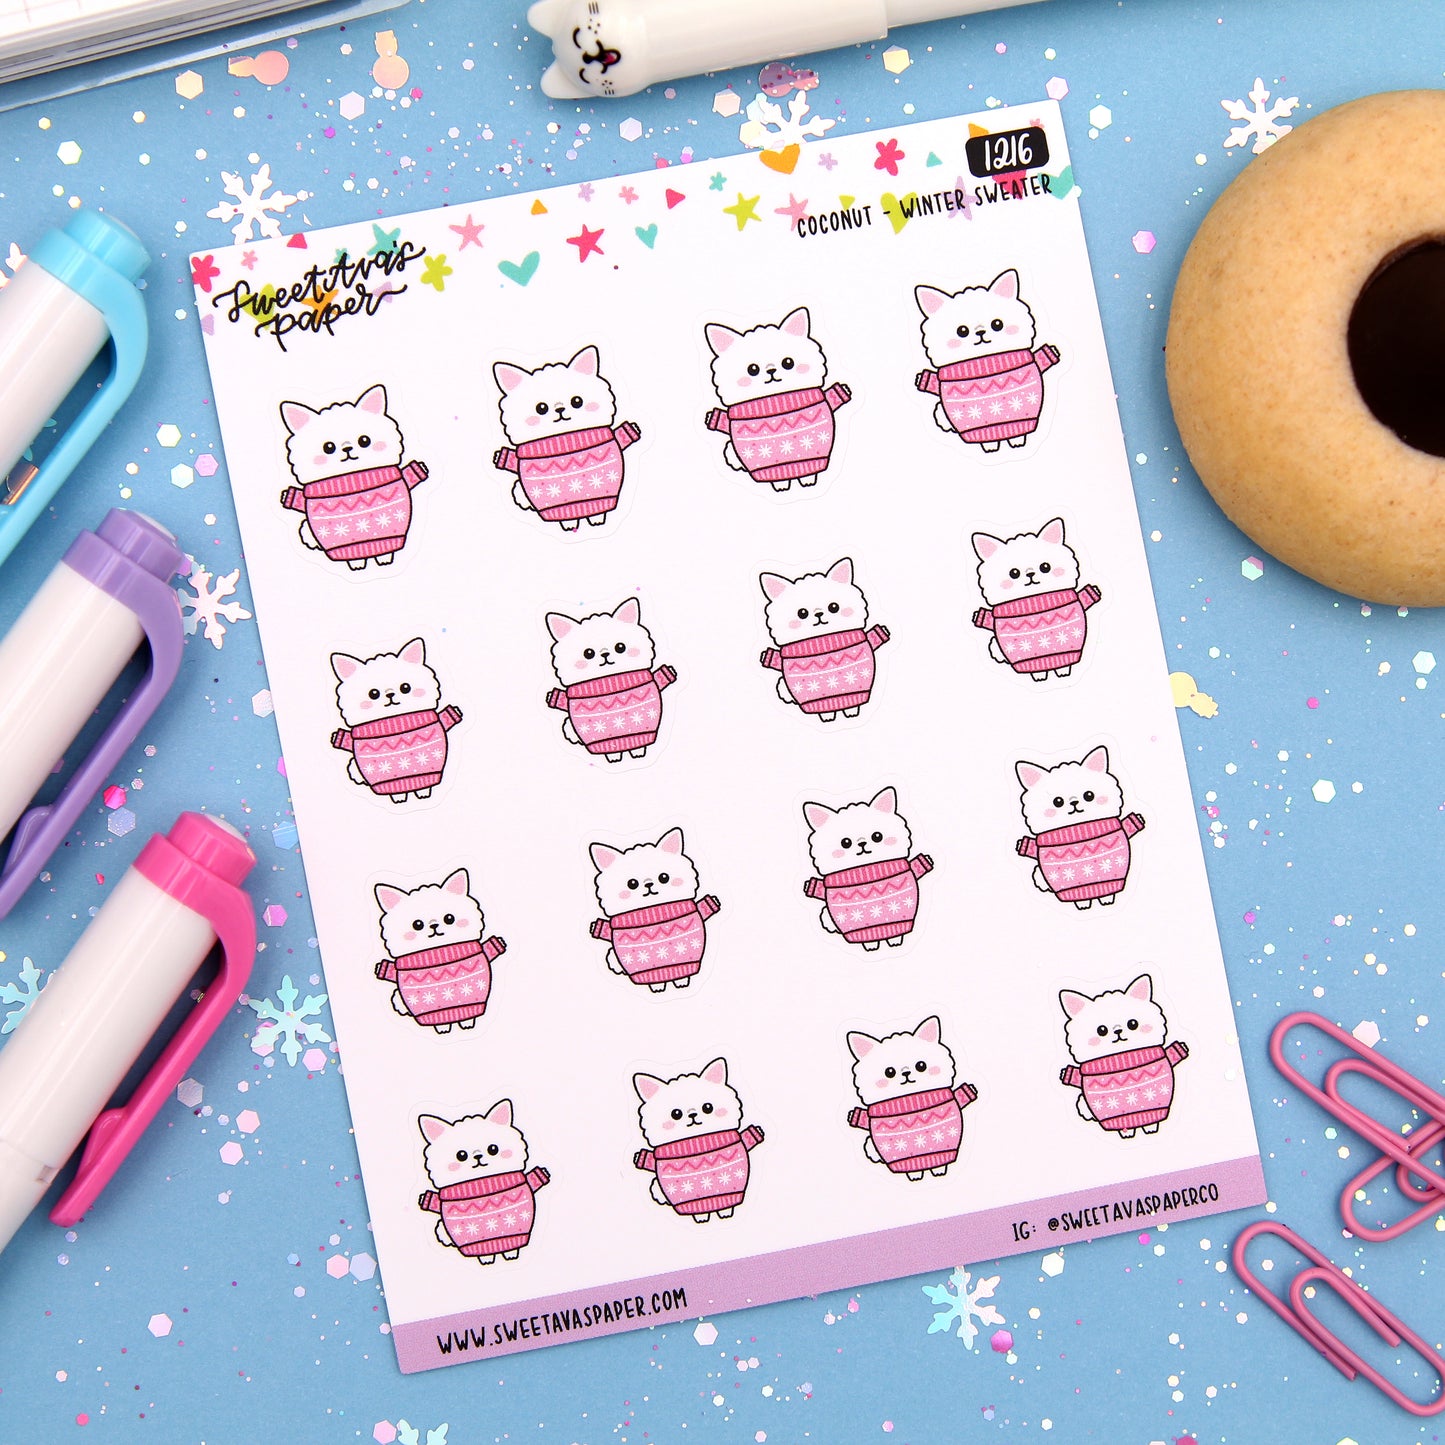 Sweater Weather Planner Stickers - Coconut the Puppy [1216]